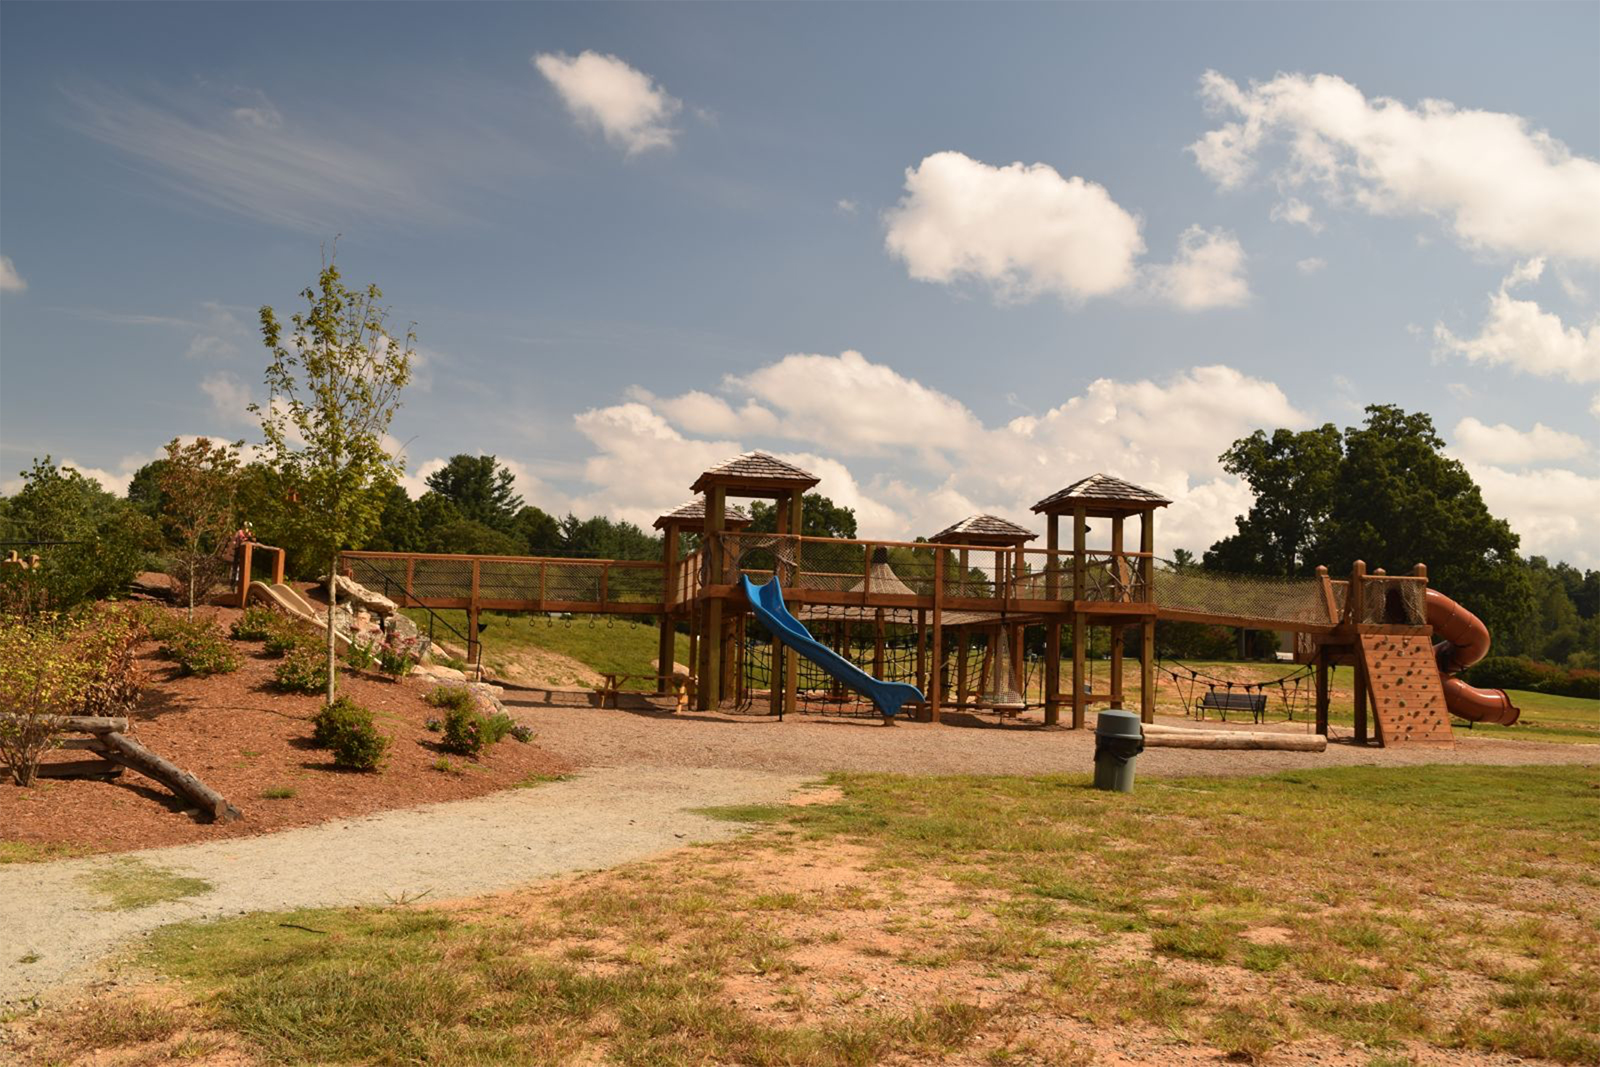 The Park at Flat Rock - Conserving Carolina - Community Green Space